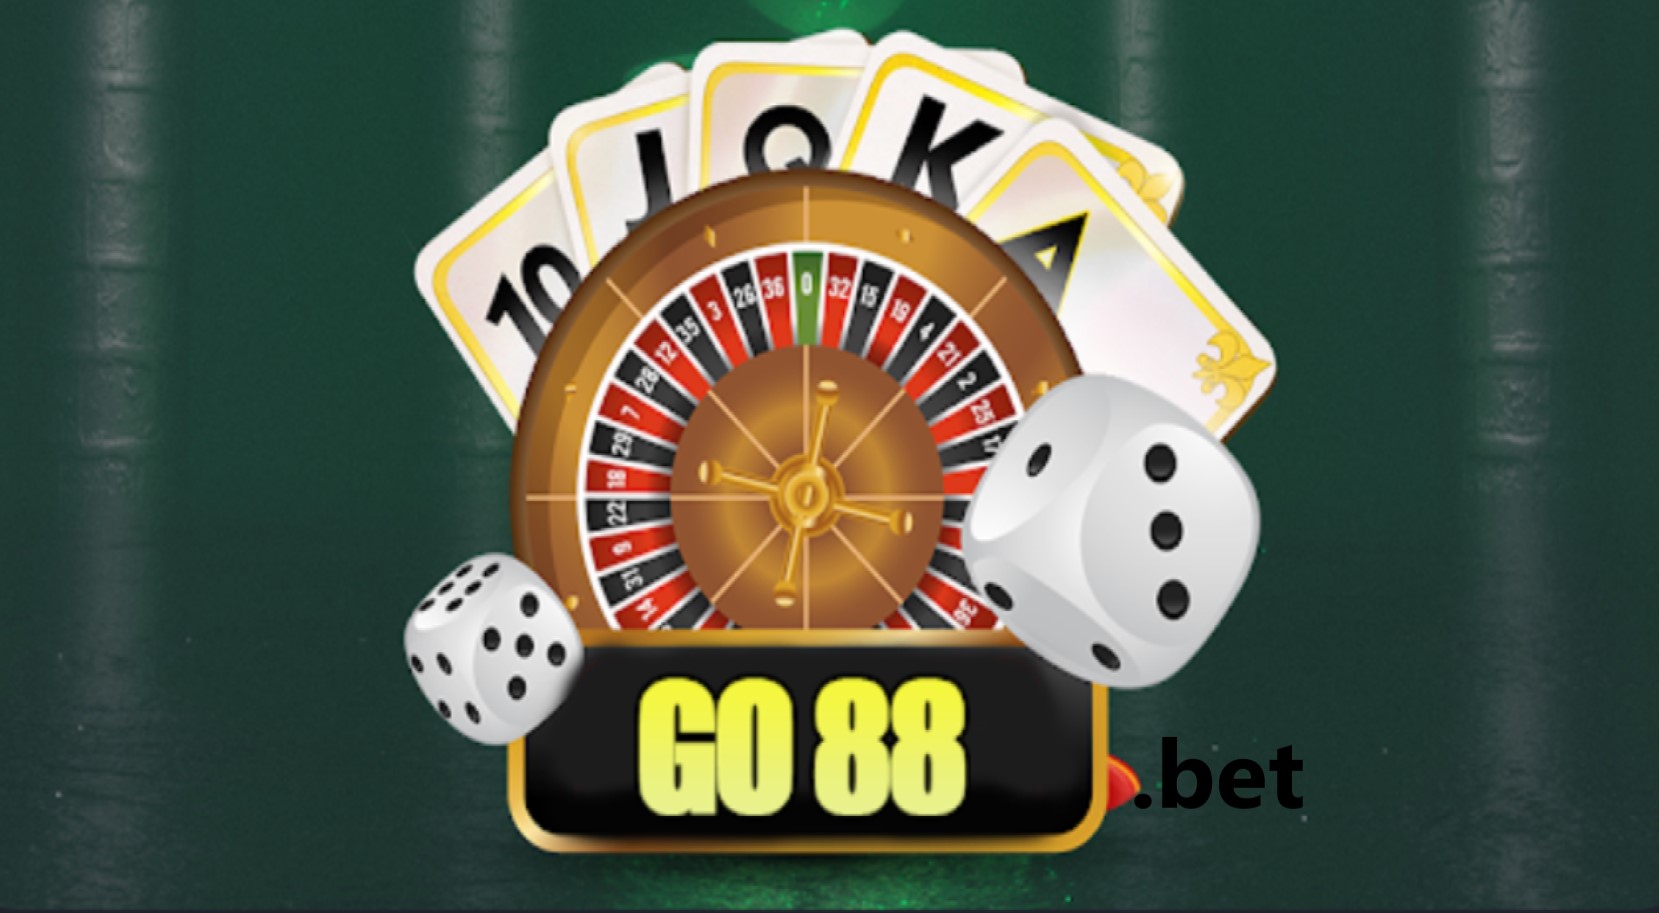 Domain go88.bet của cổng game Go88